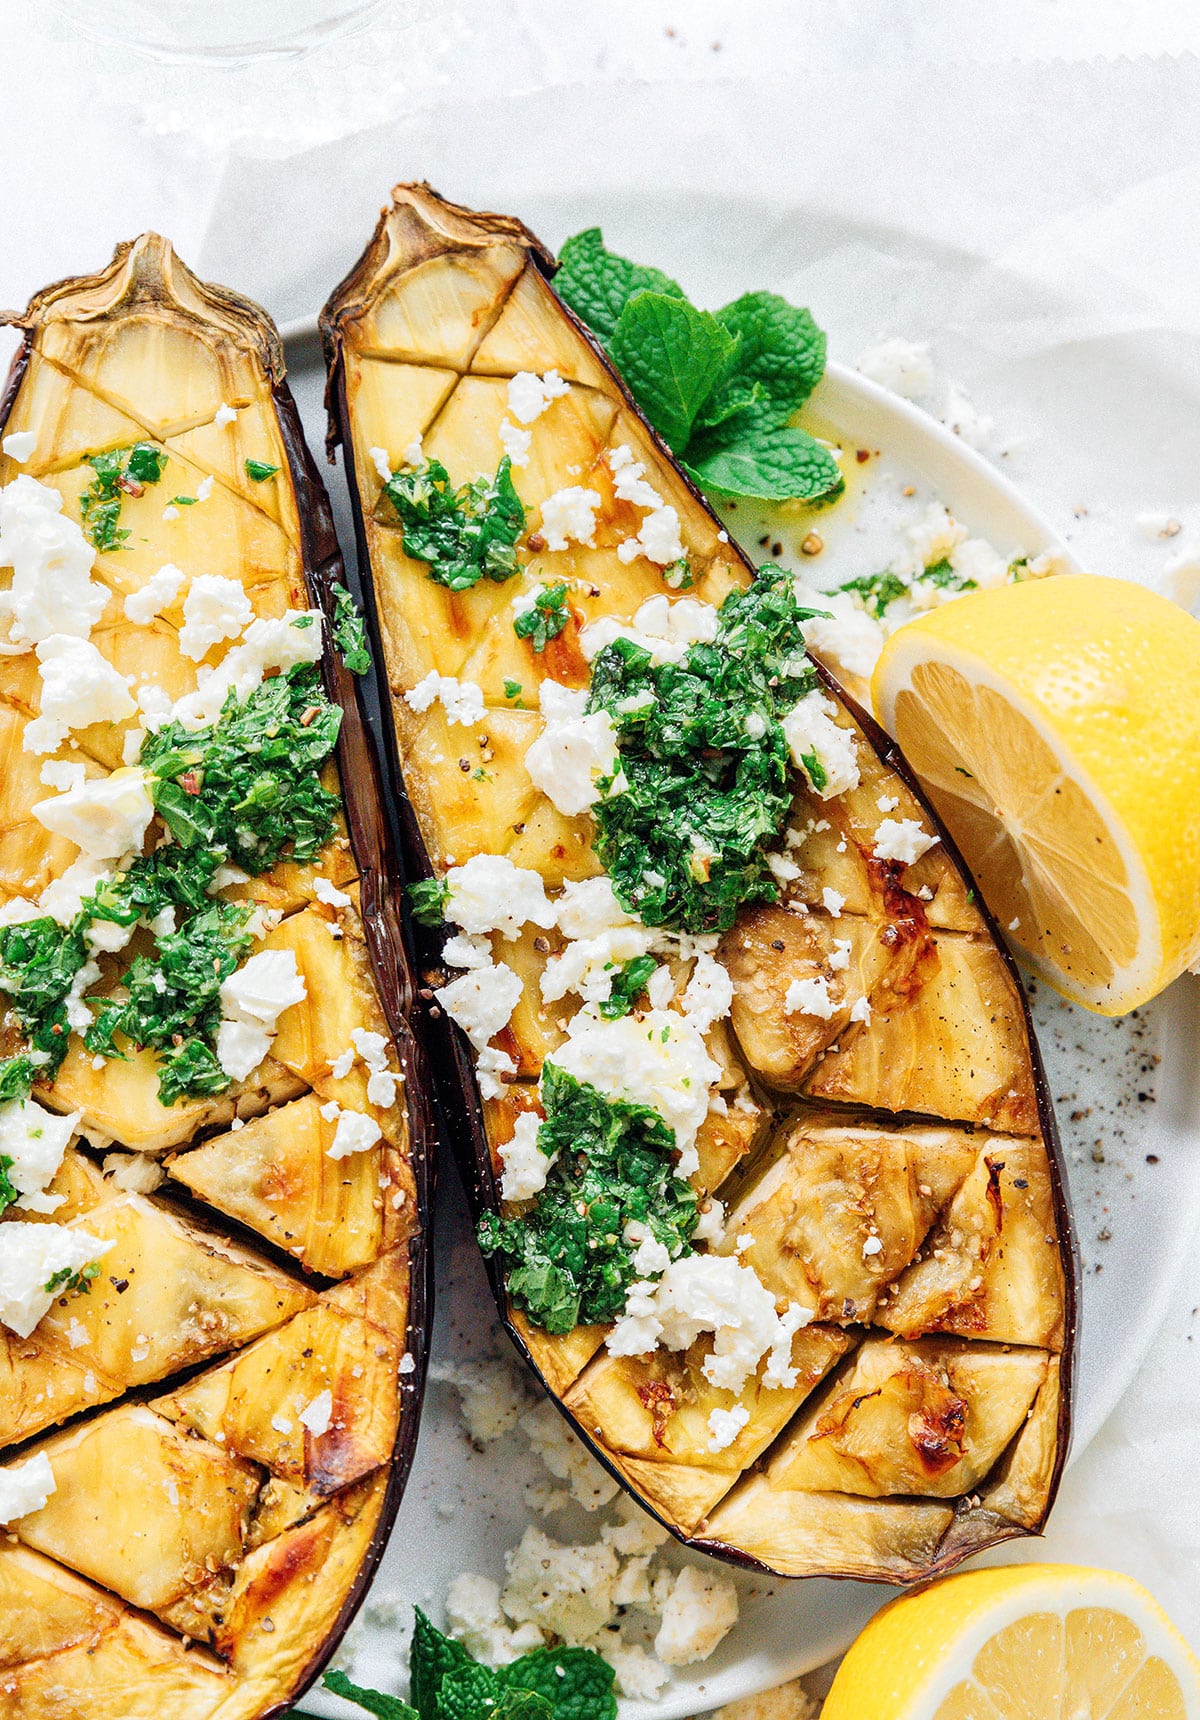 Roasted eggplant cut open with feta and mint.